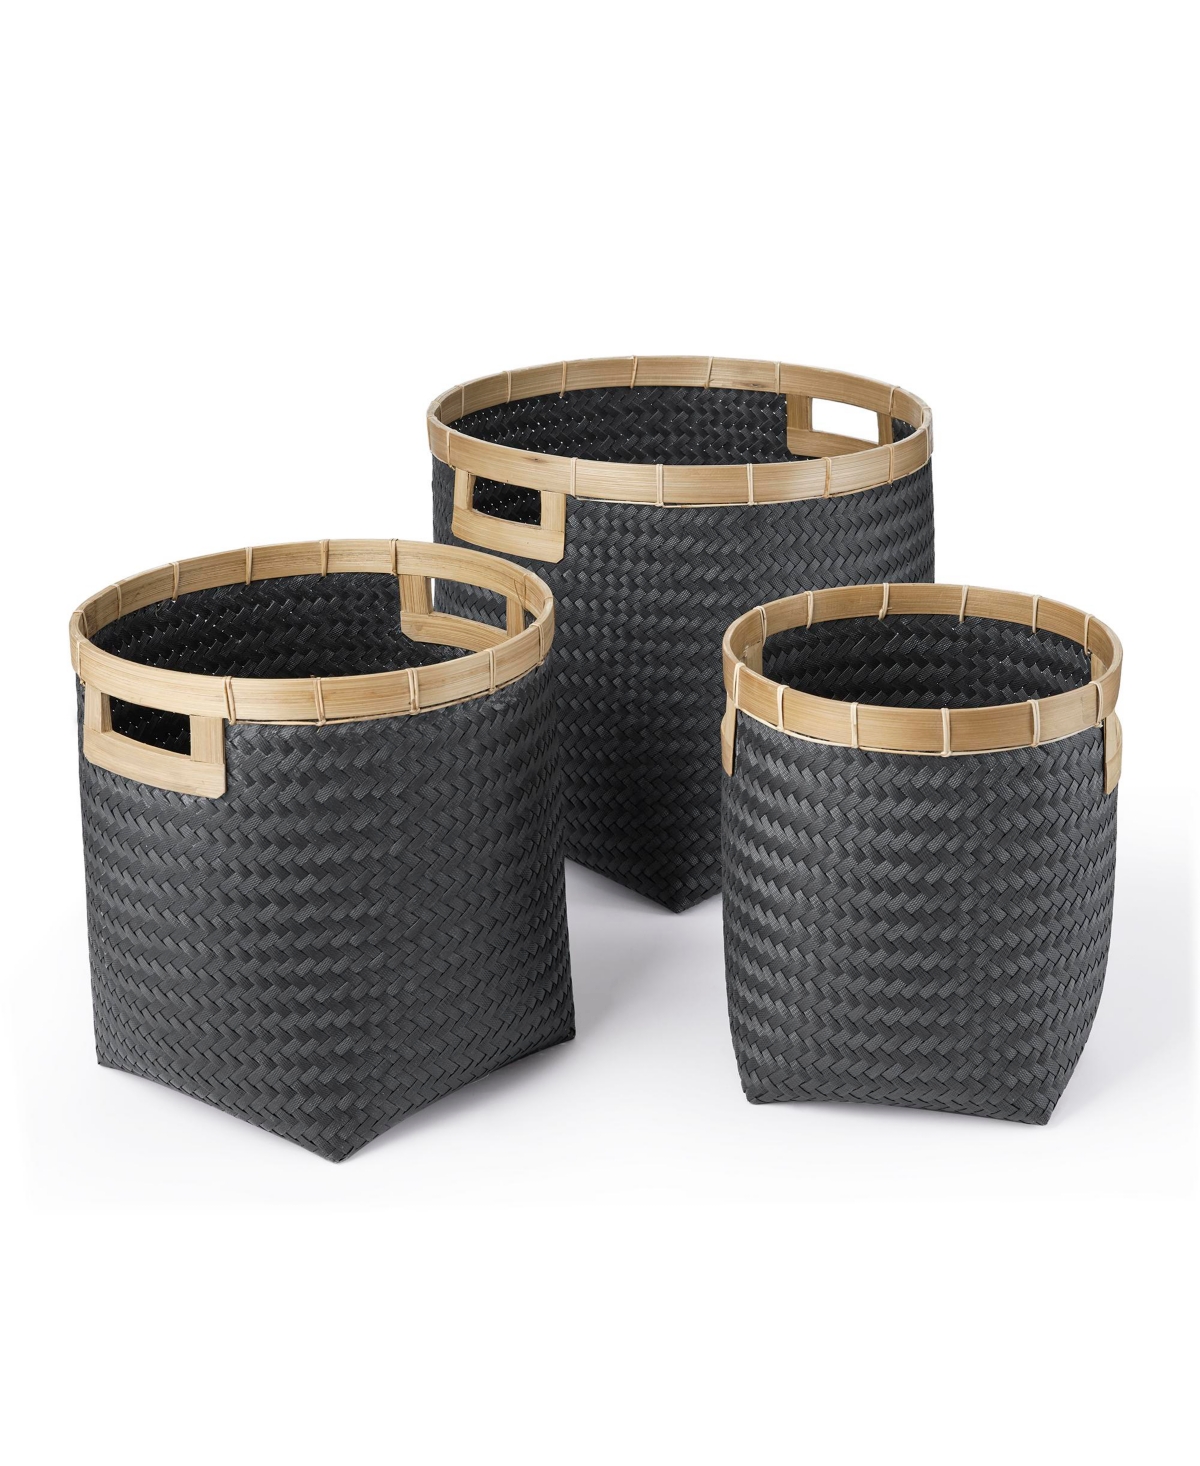 3 Piece Round Top and Square Bottom Bamboo Basket Set with Cut-Out Handles, Natural Rim - Black